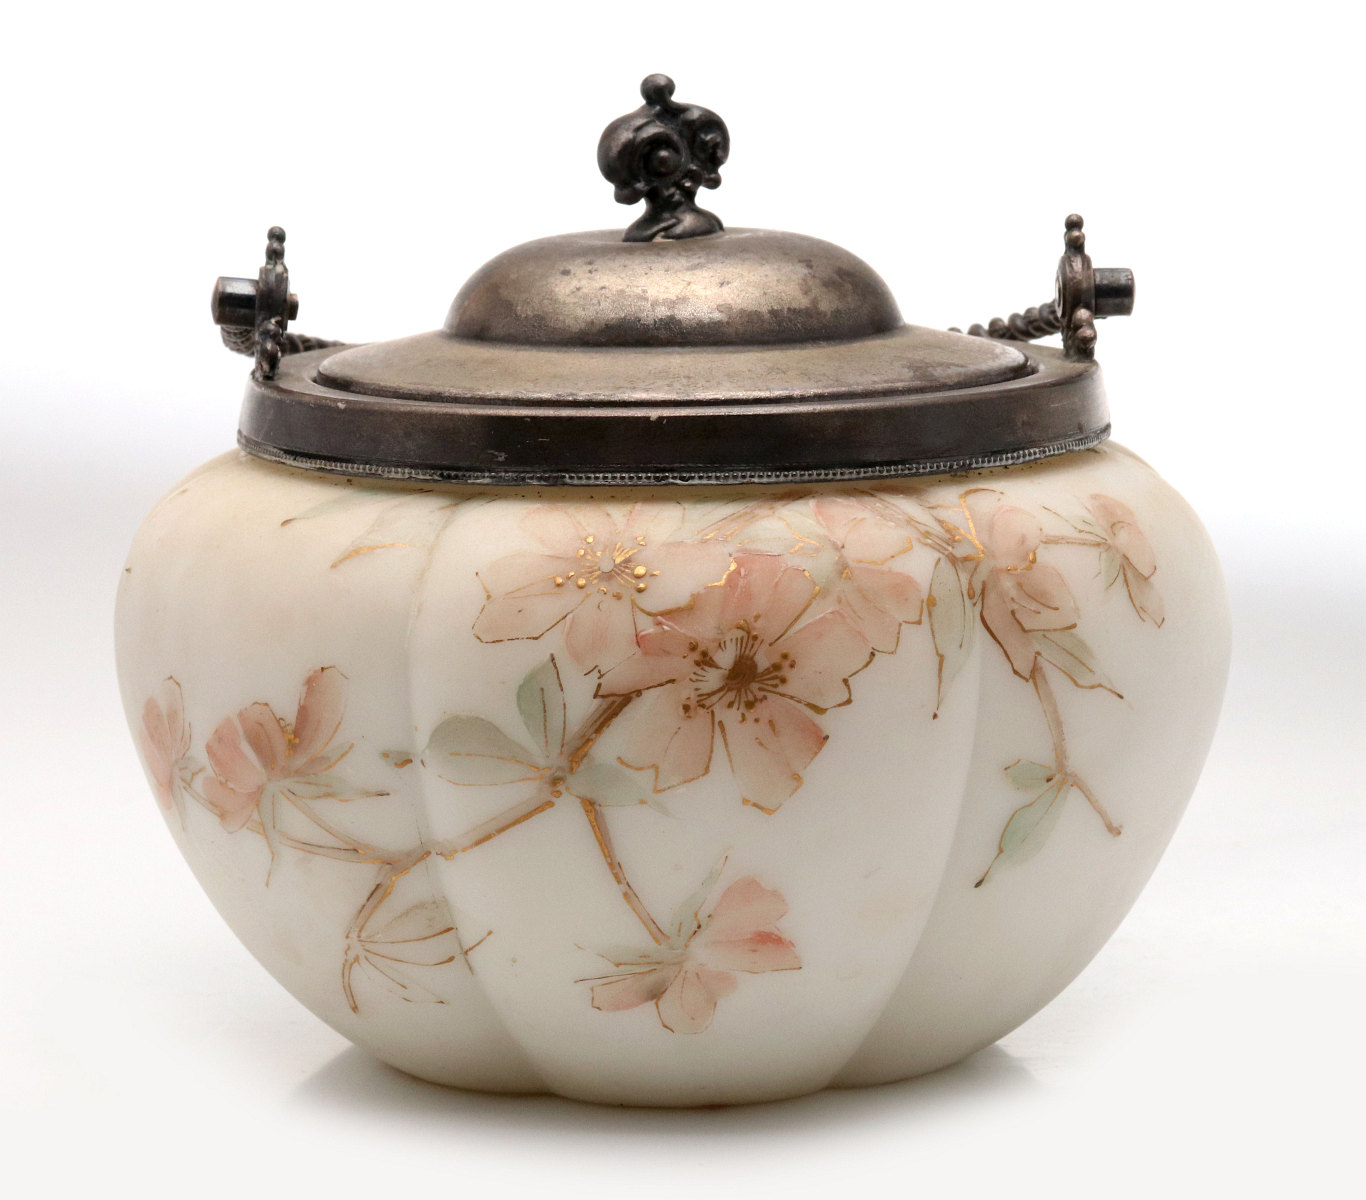 AN ANTIQUE COVERED JAR ATTRIBUTED MOUNT WASHINGTON